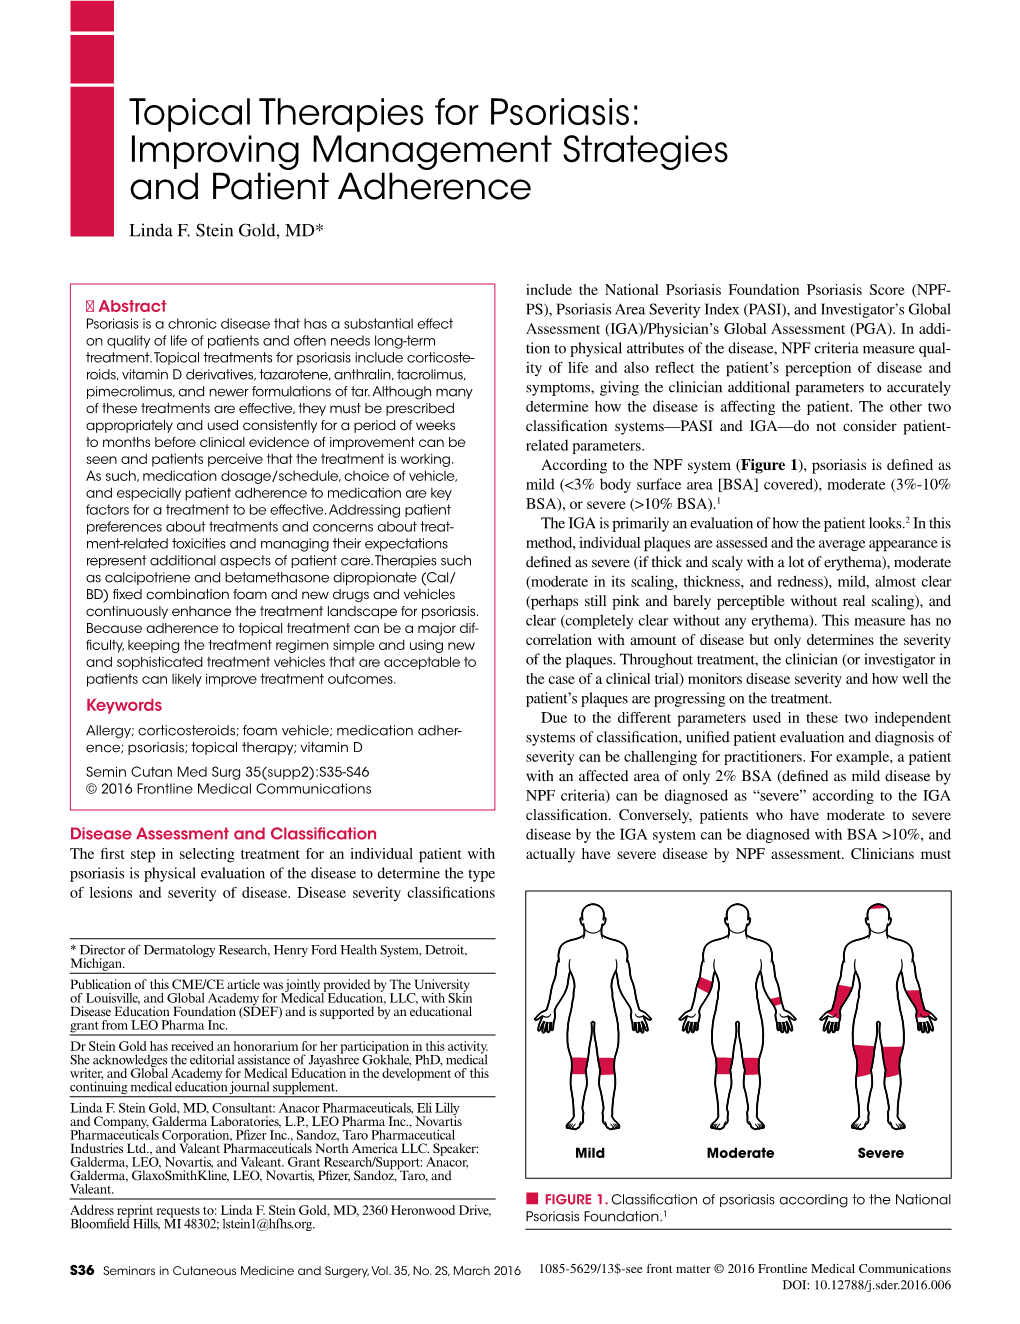 Topical Therapies for Psoriasis: Improving Management Strategies and Patient Adherence Linda F